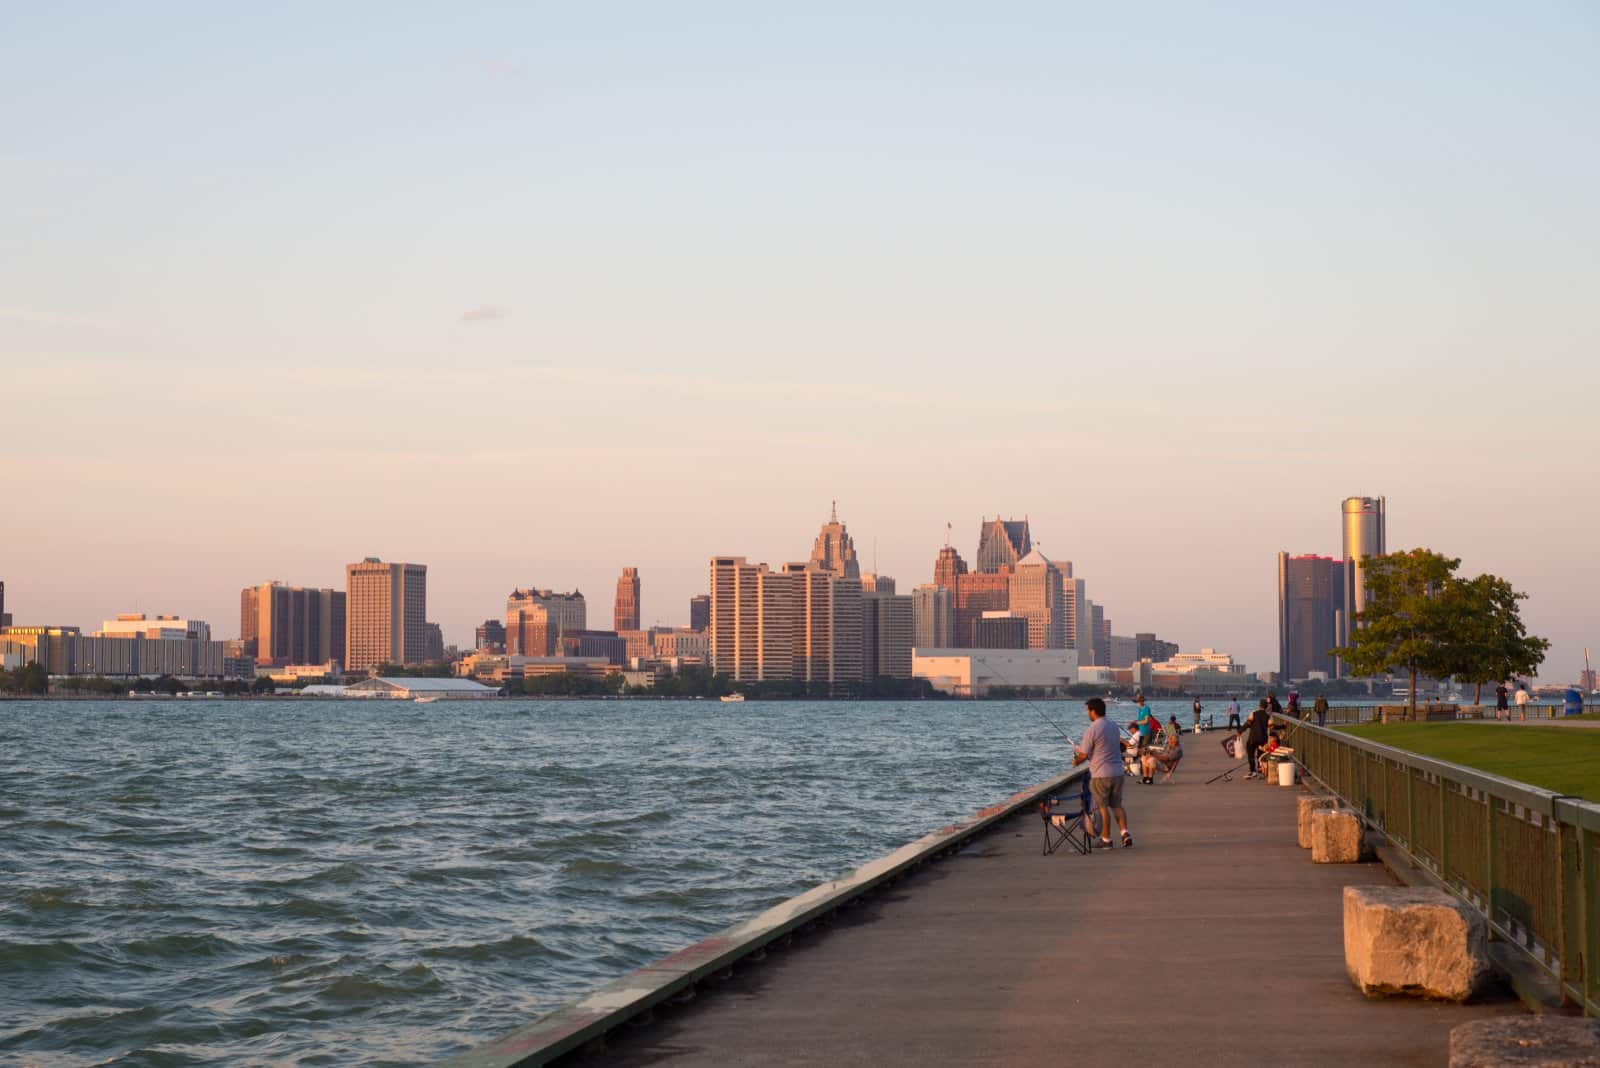 <p class="wp-caption-text">Image Credit: Shutterstock / Roxana Gonzalez</p>  <p>Detroit, the emblem of American industrial decline, faces challenges from unemployment to urban decay. Yet, it’s also a place of strong community and an emerging hub for artists and entrepreneurs.</p>